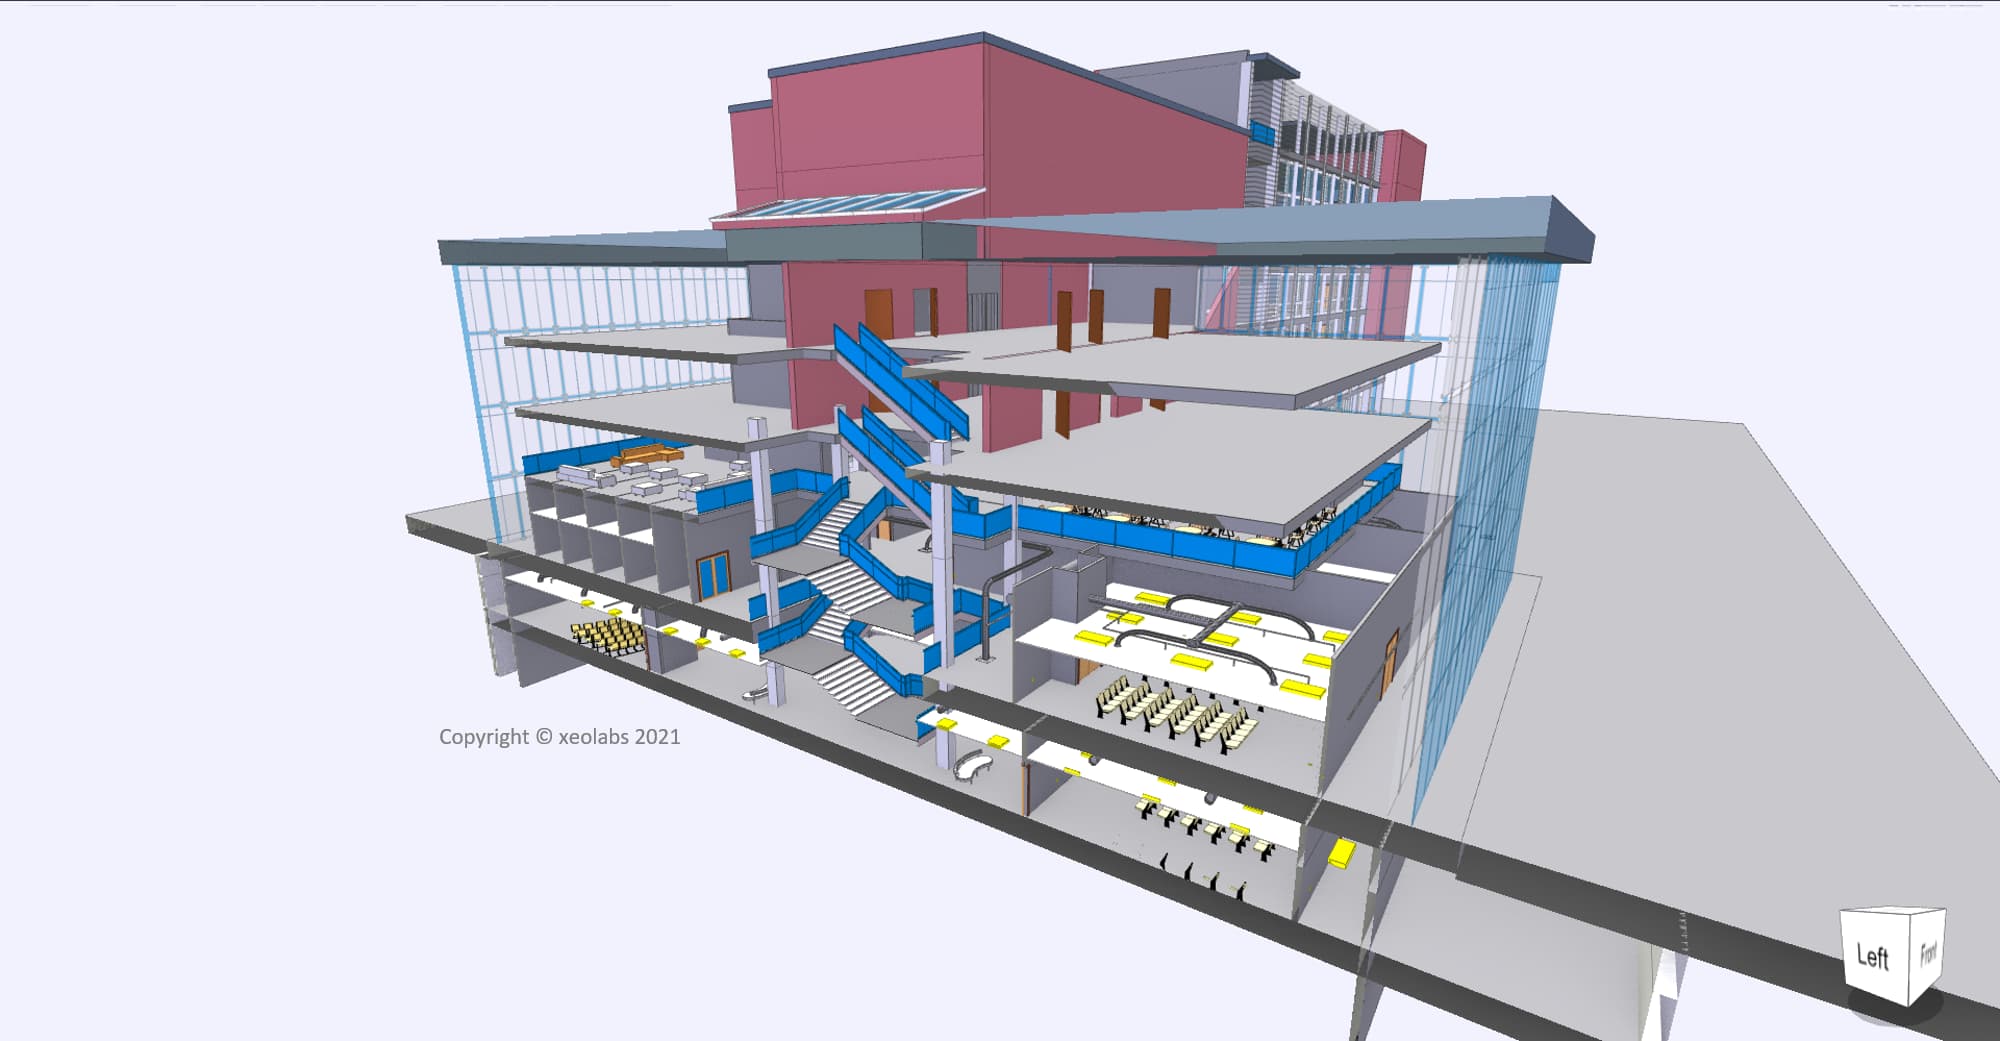 How much BIM do you really need?